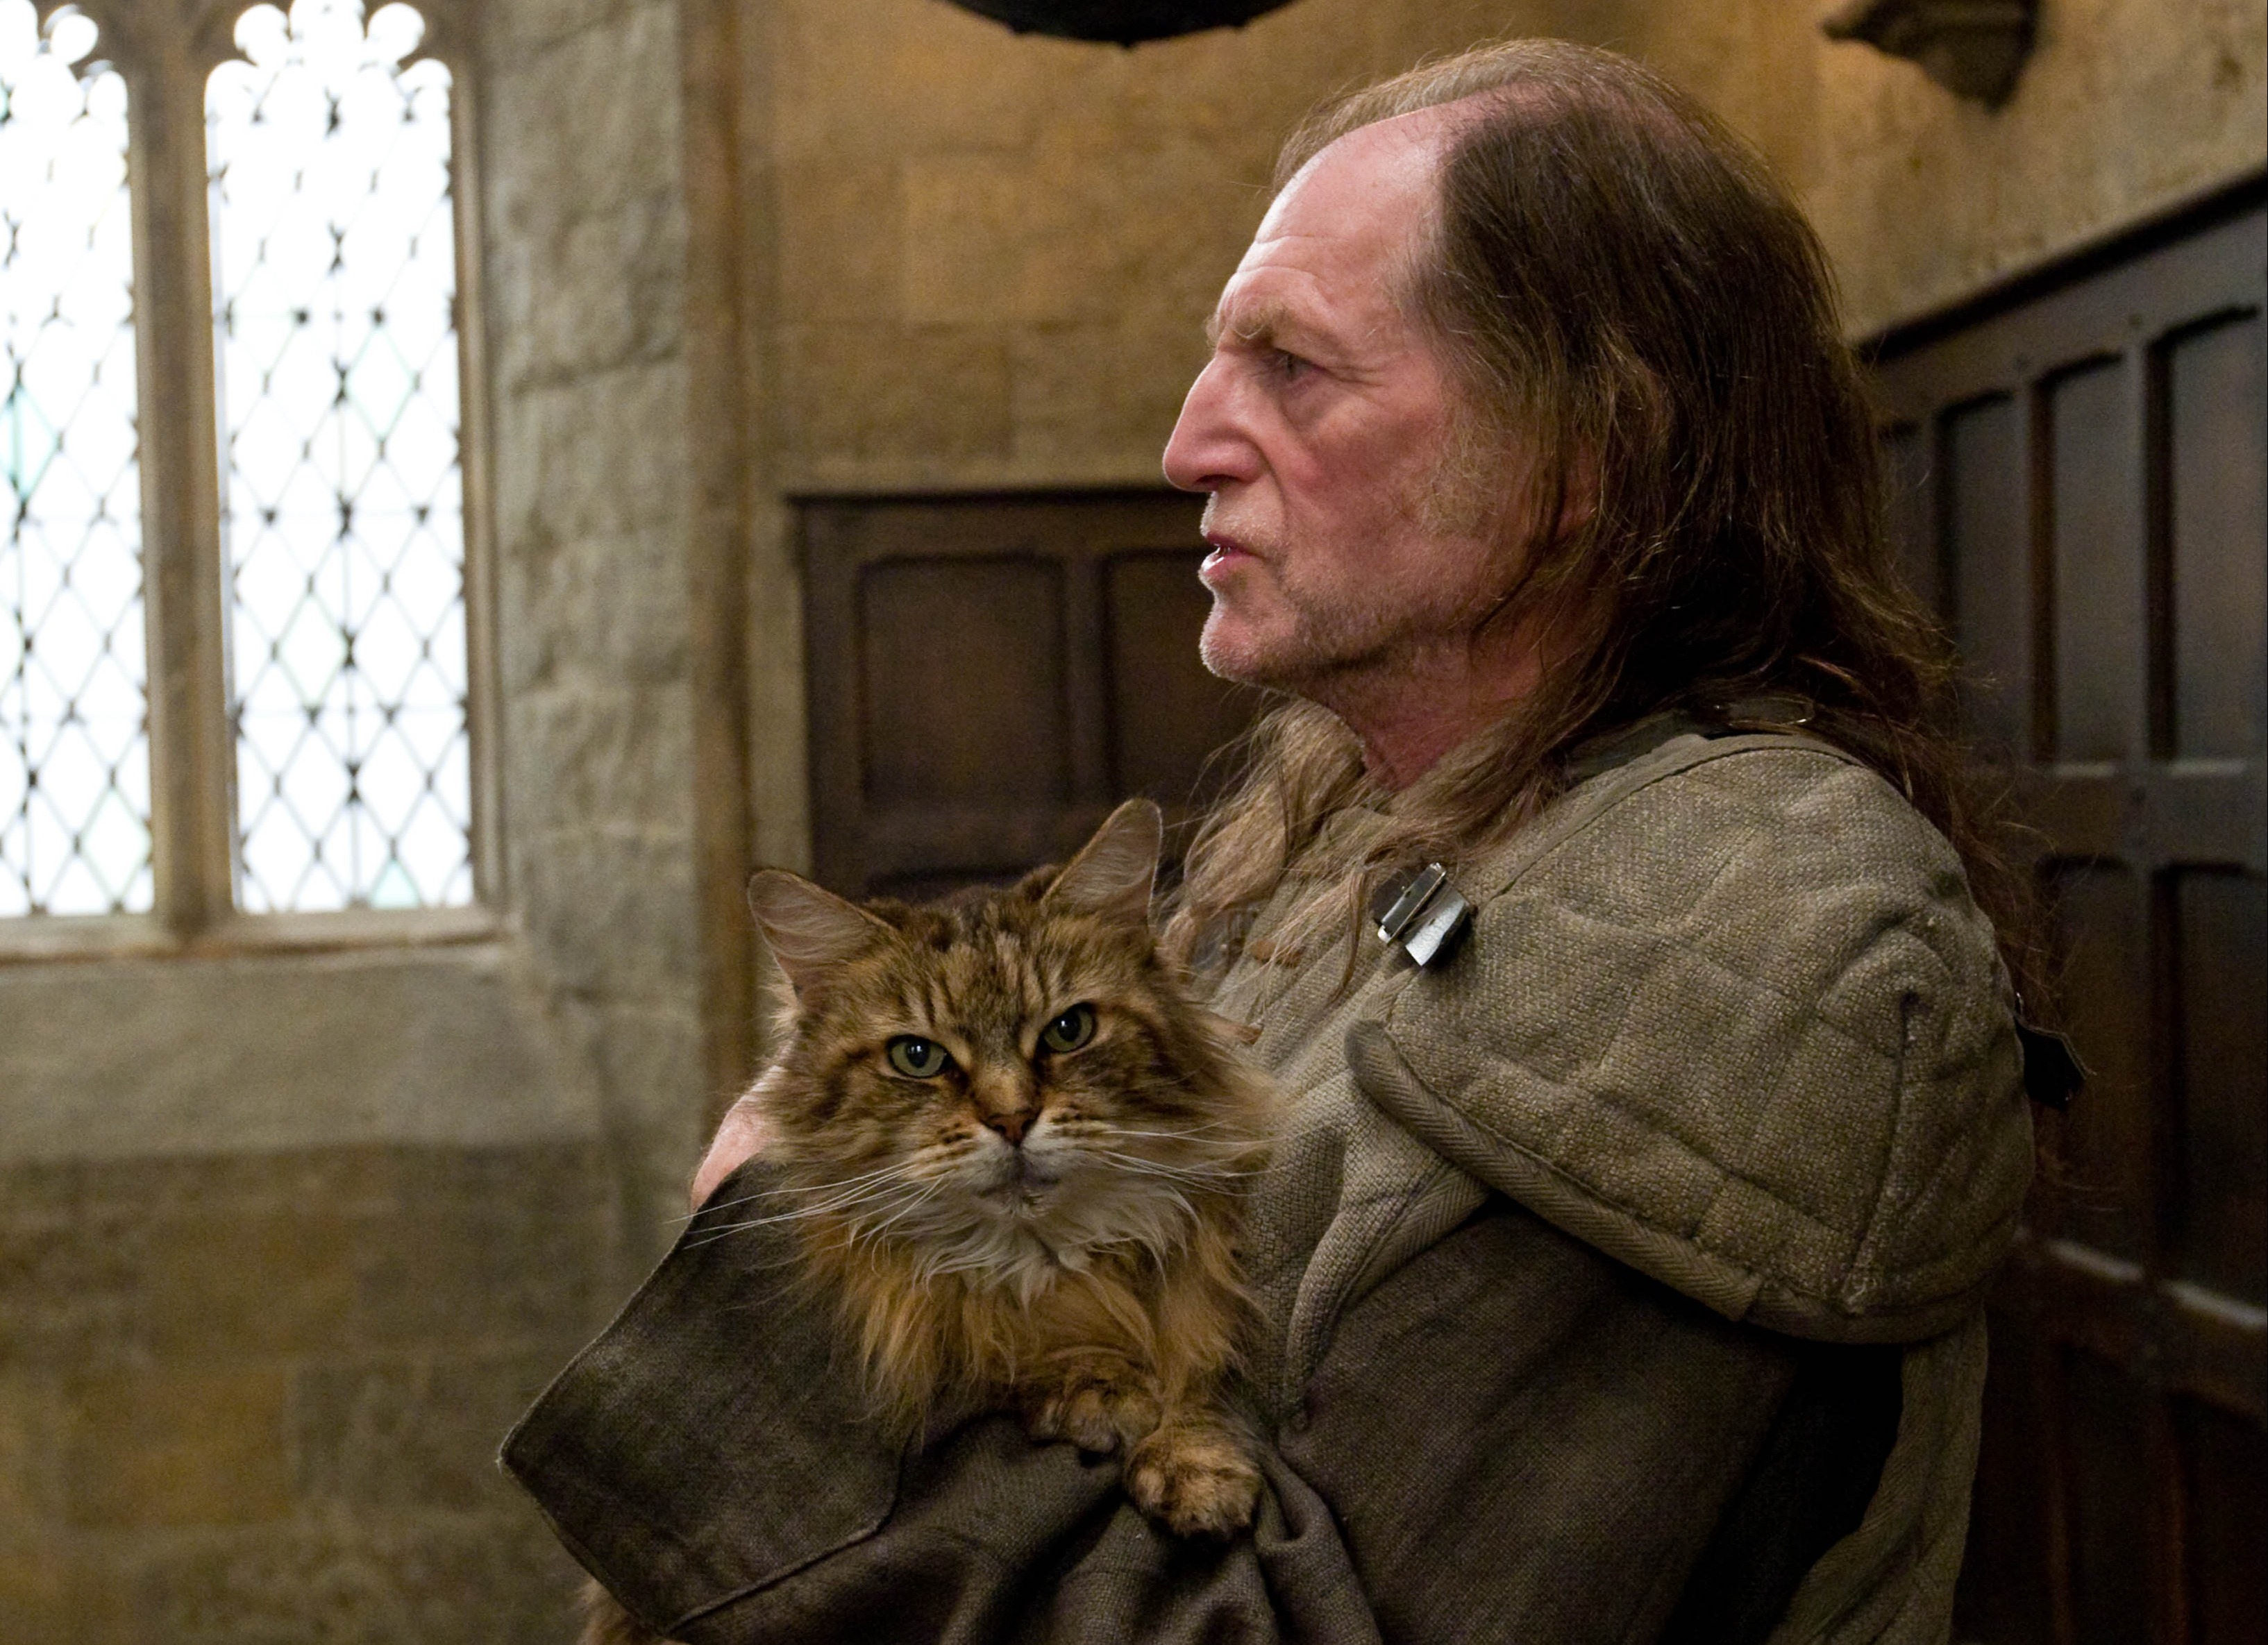 What are the characteristics of Argus Filch's cat?